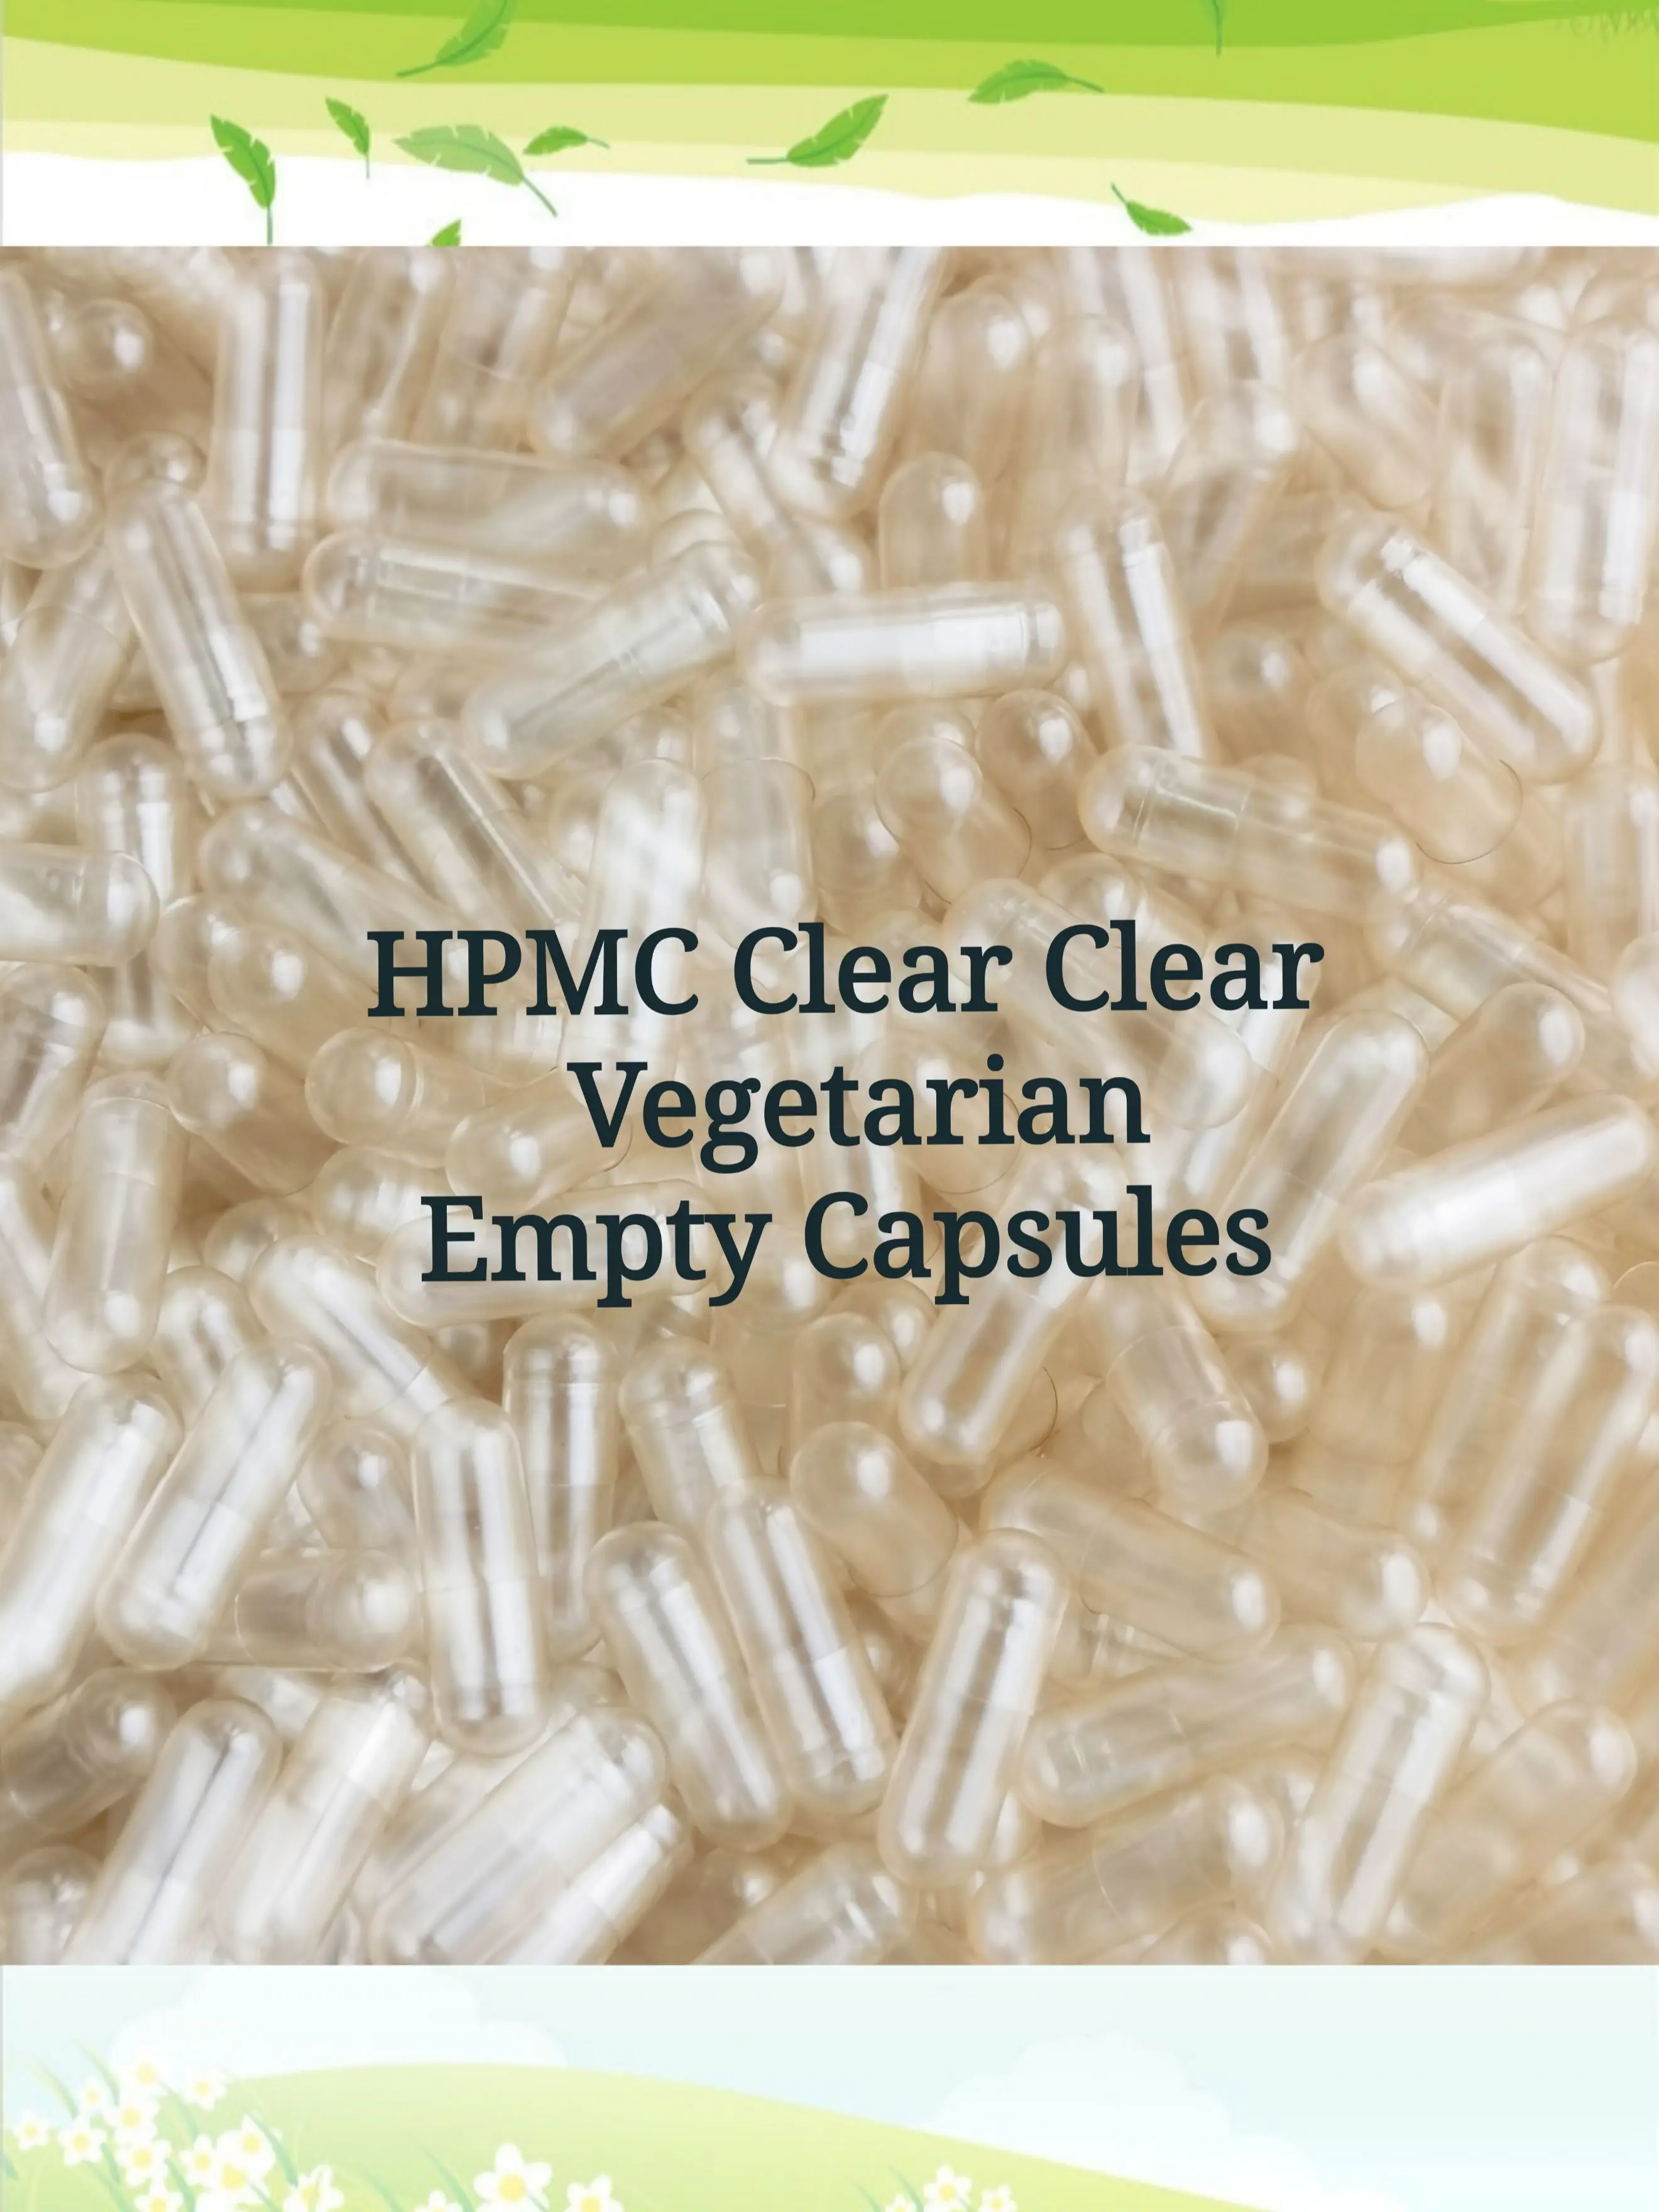 

0# 5000pcs!Clear transparent HPMC Vegetable empty capsules,vegetarian capsules! (closed pr seperated capsules available!)